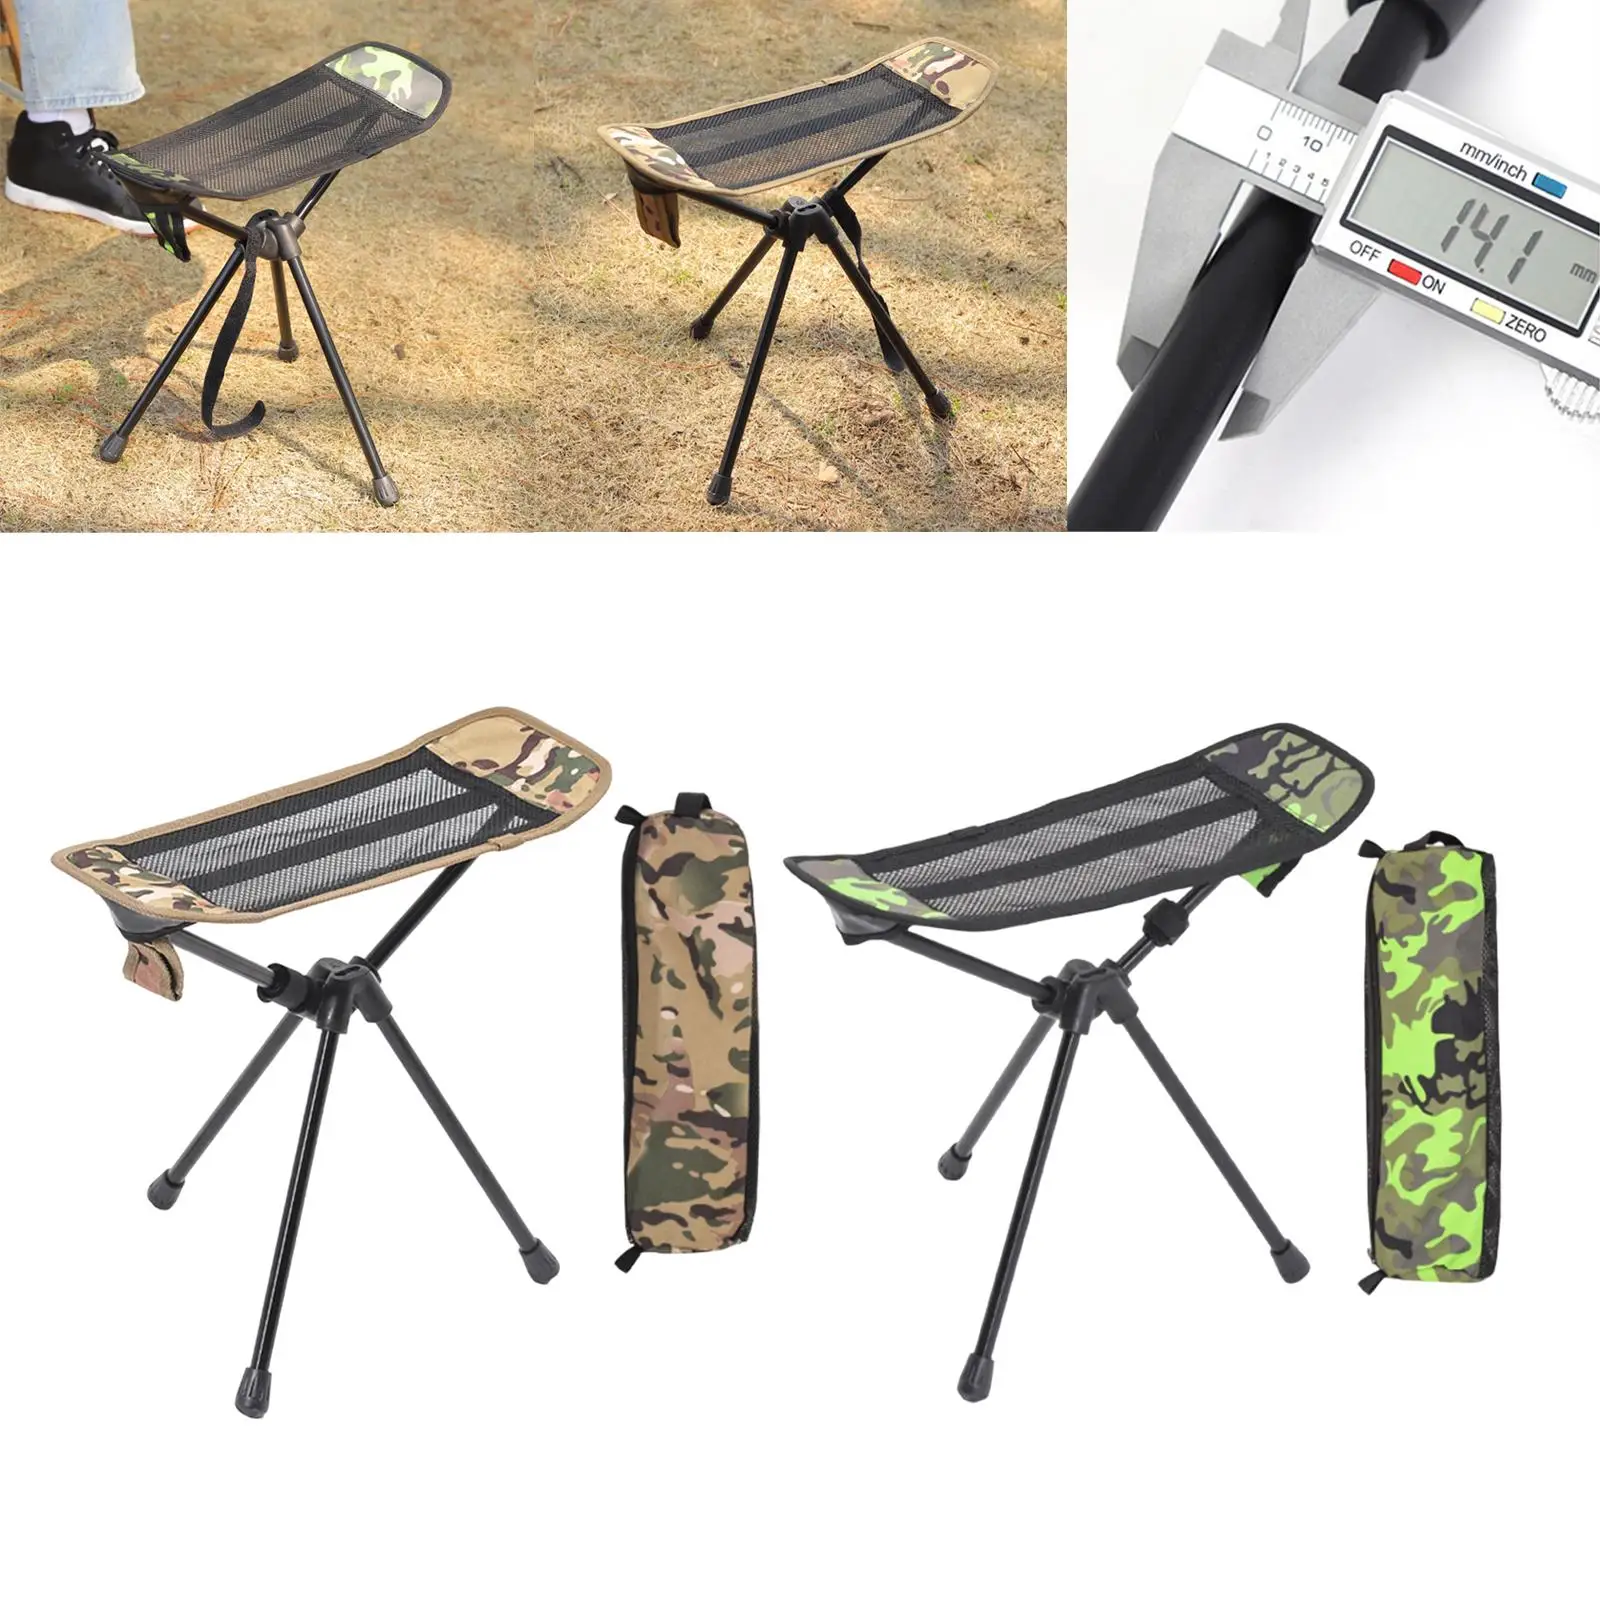 Portable Footstool Lightweight Stools Footrest Stool with Carry Bag Folding Chair recliner for Garden Beach Fishing BBQ Hiking